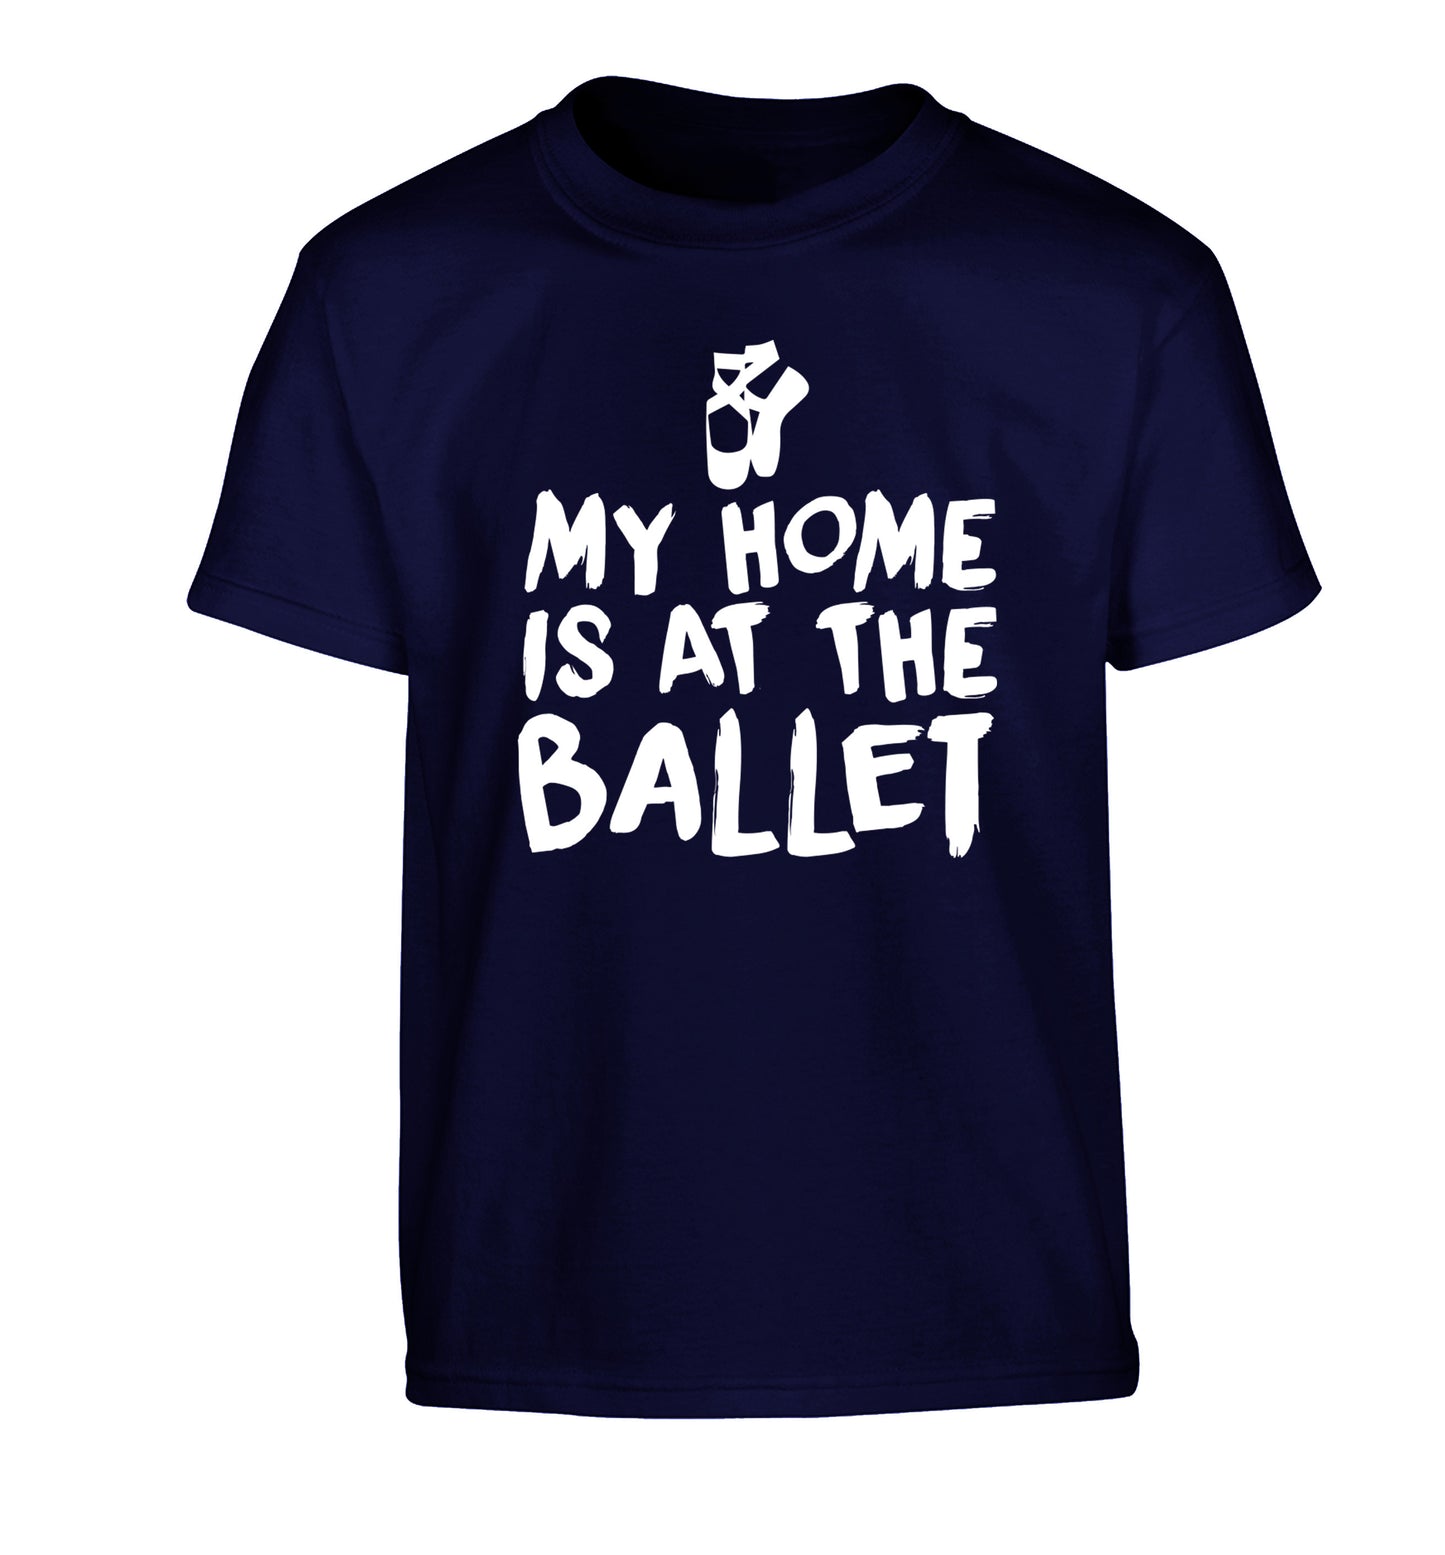 My home is at the ballet Children's navy Tshirt 12-14 Years